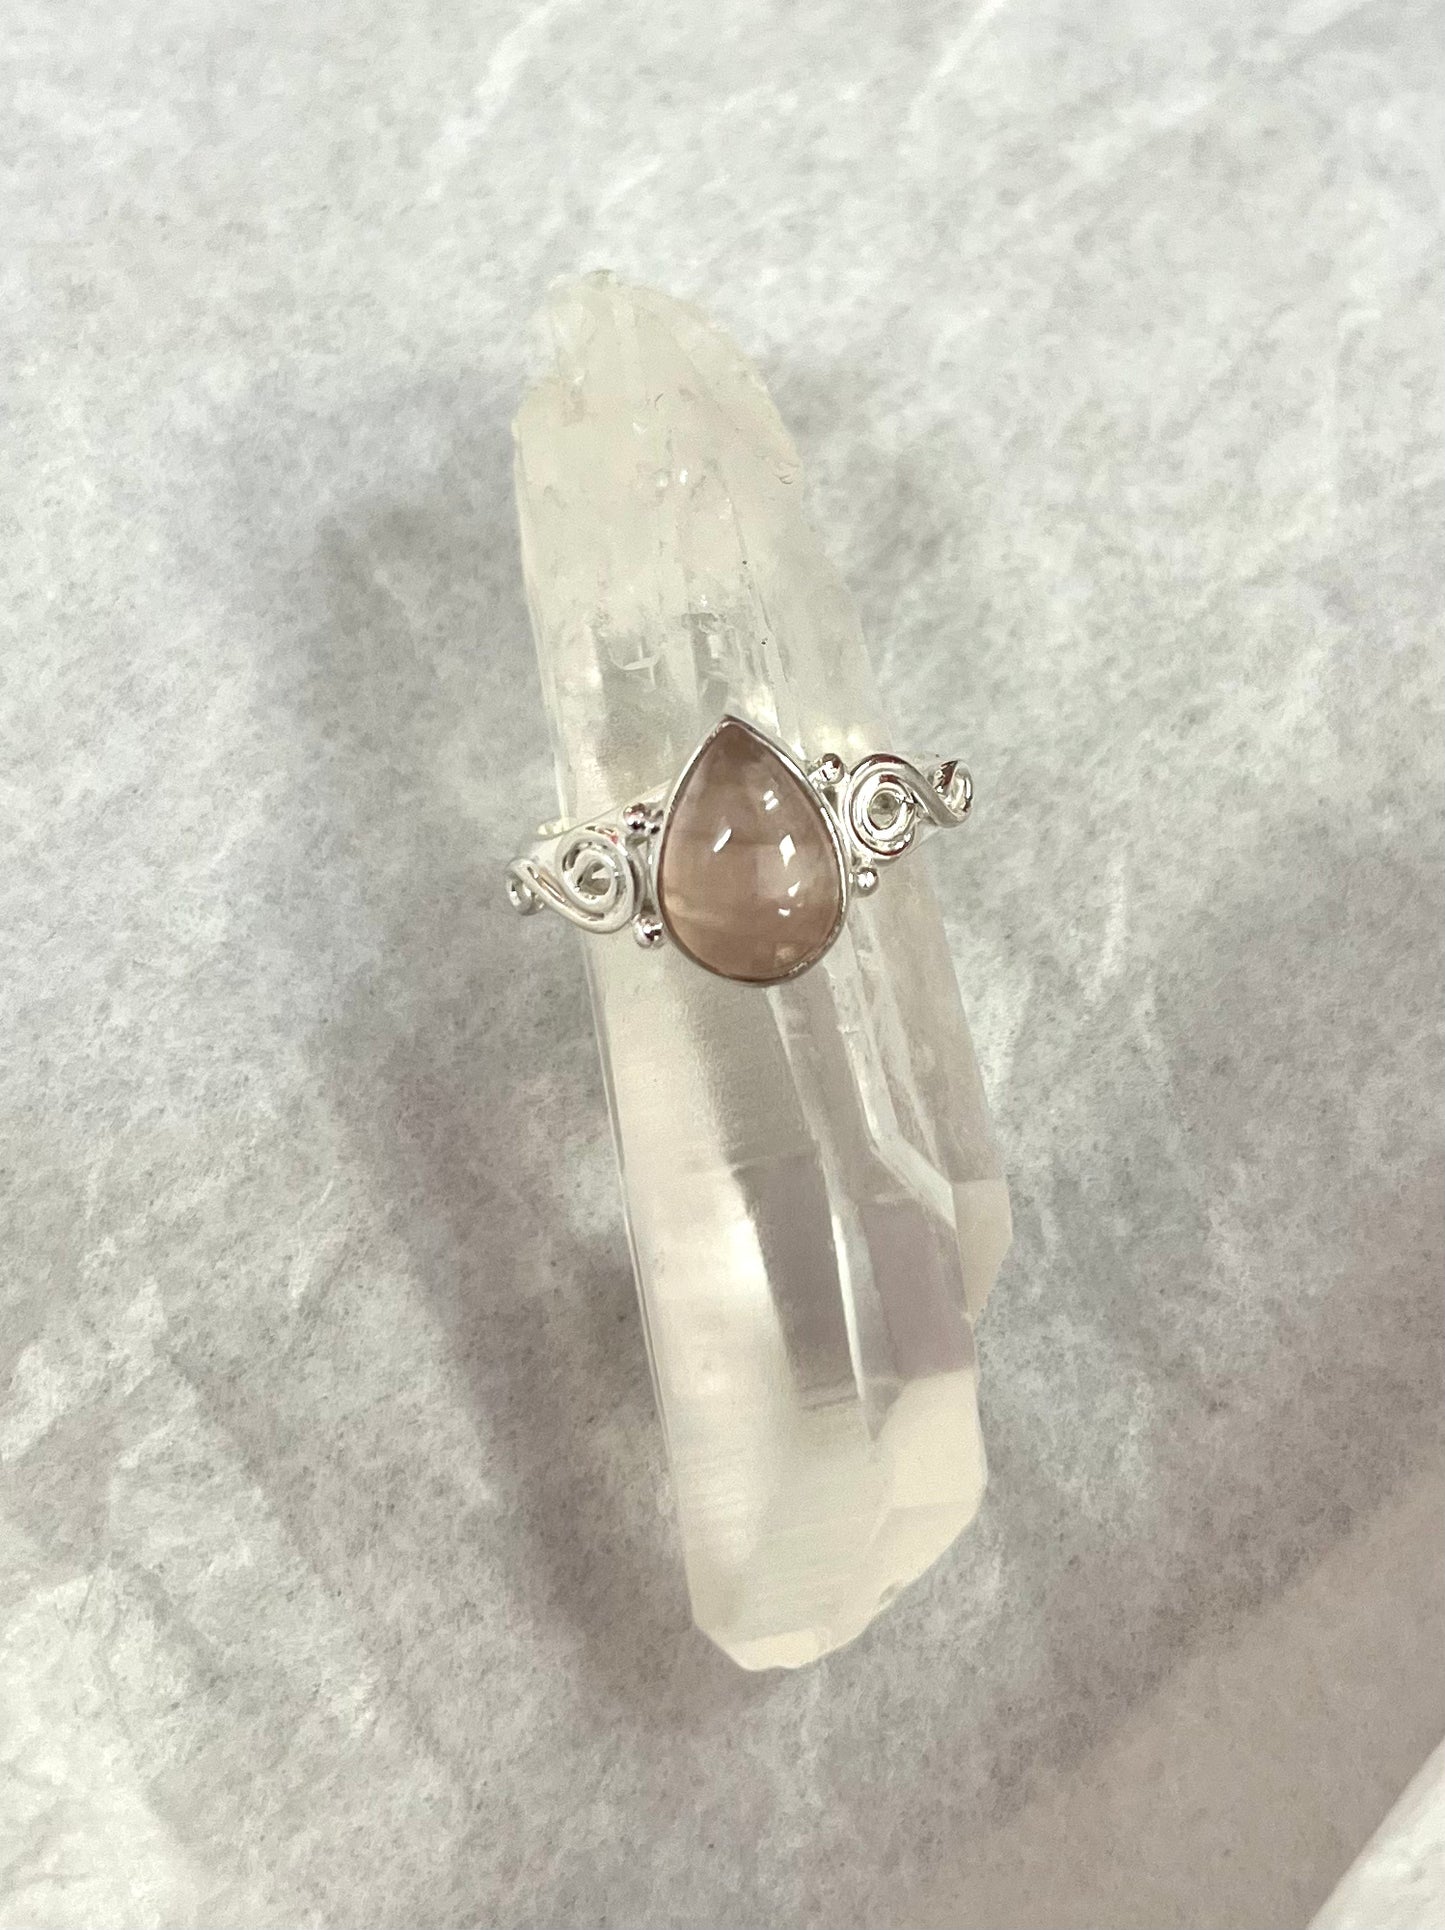 Silver Rose Quartz Ring with Spiral Detailing Size 6